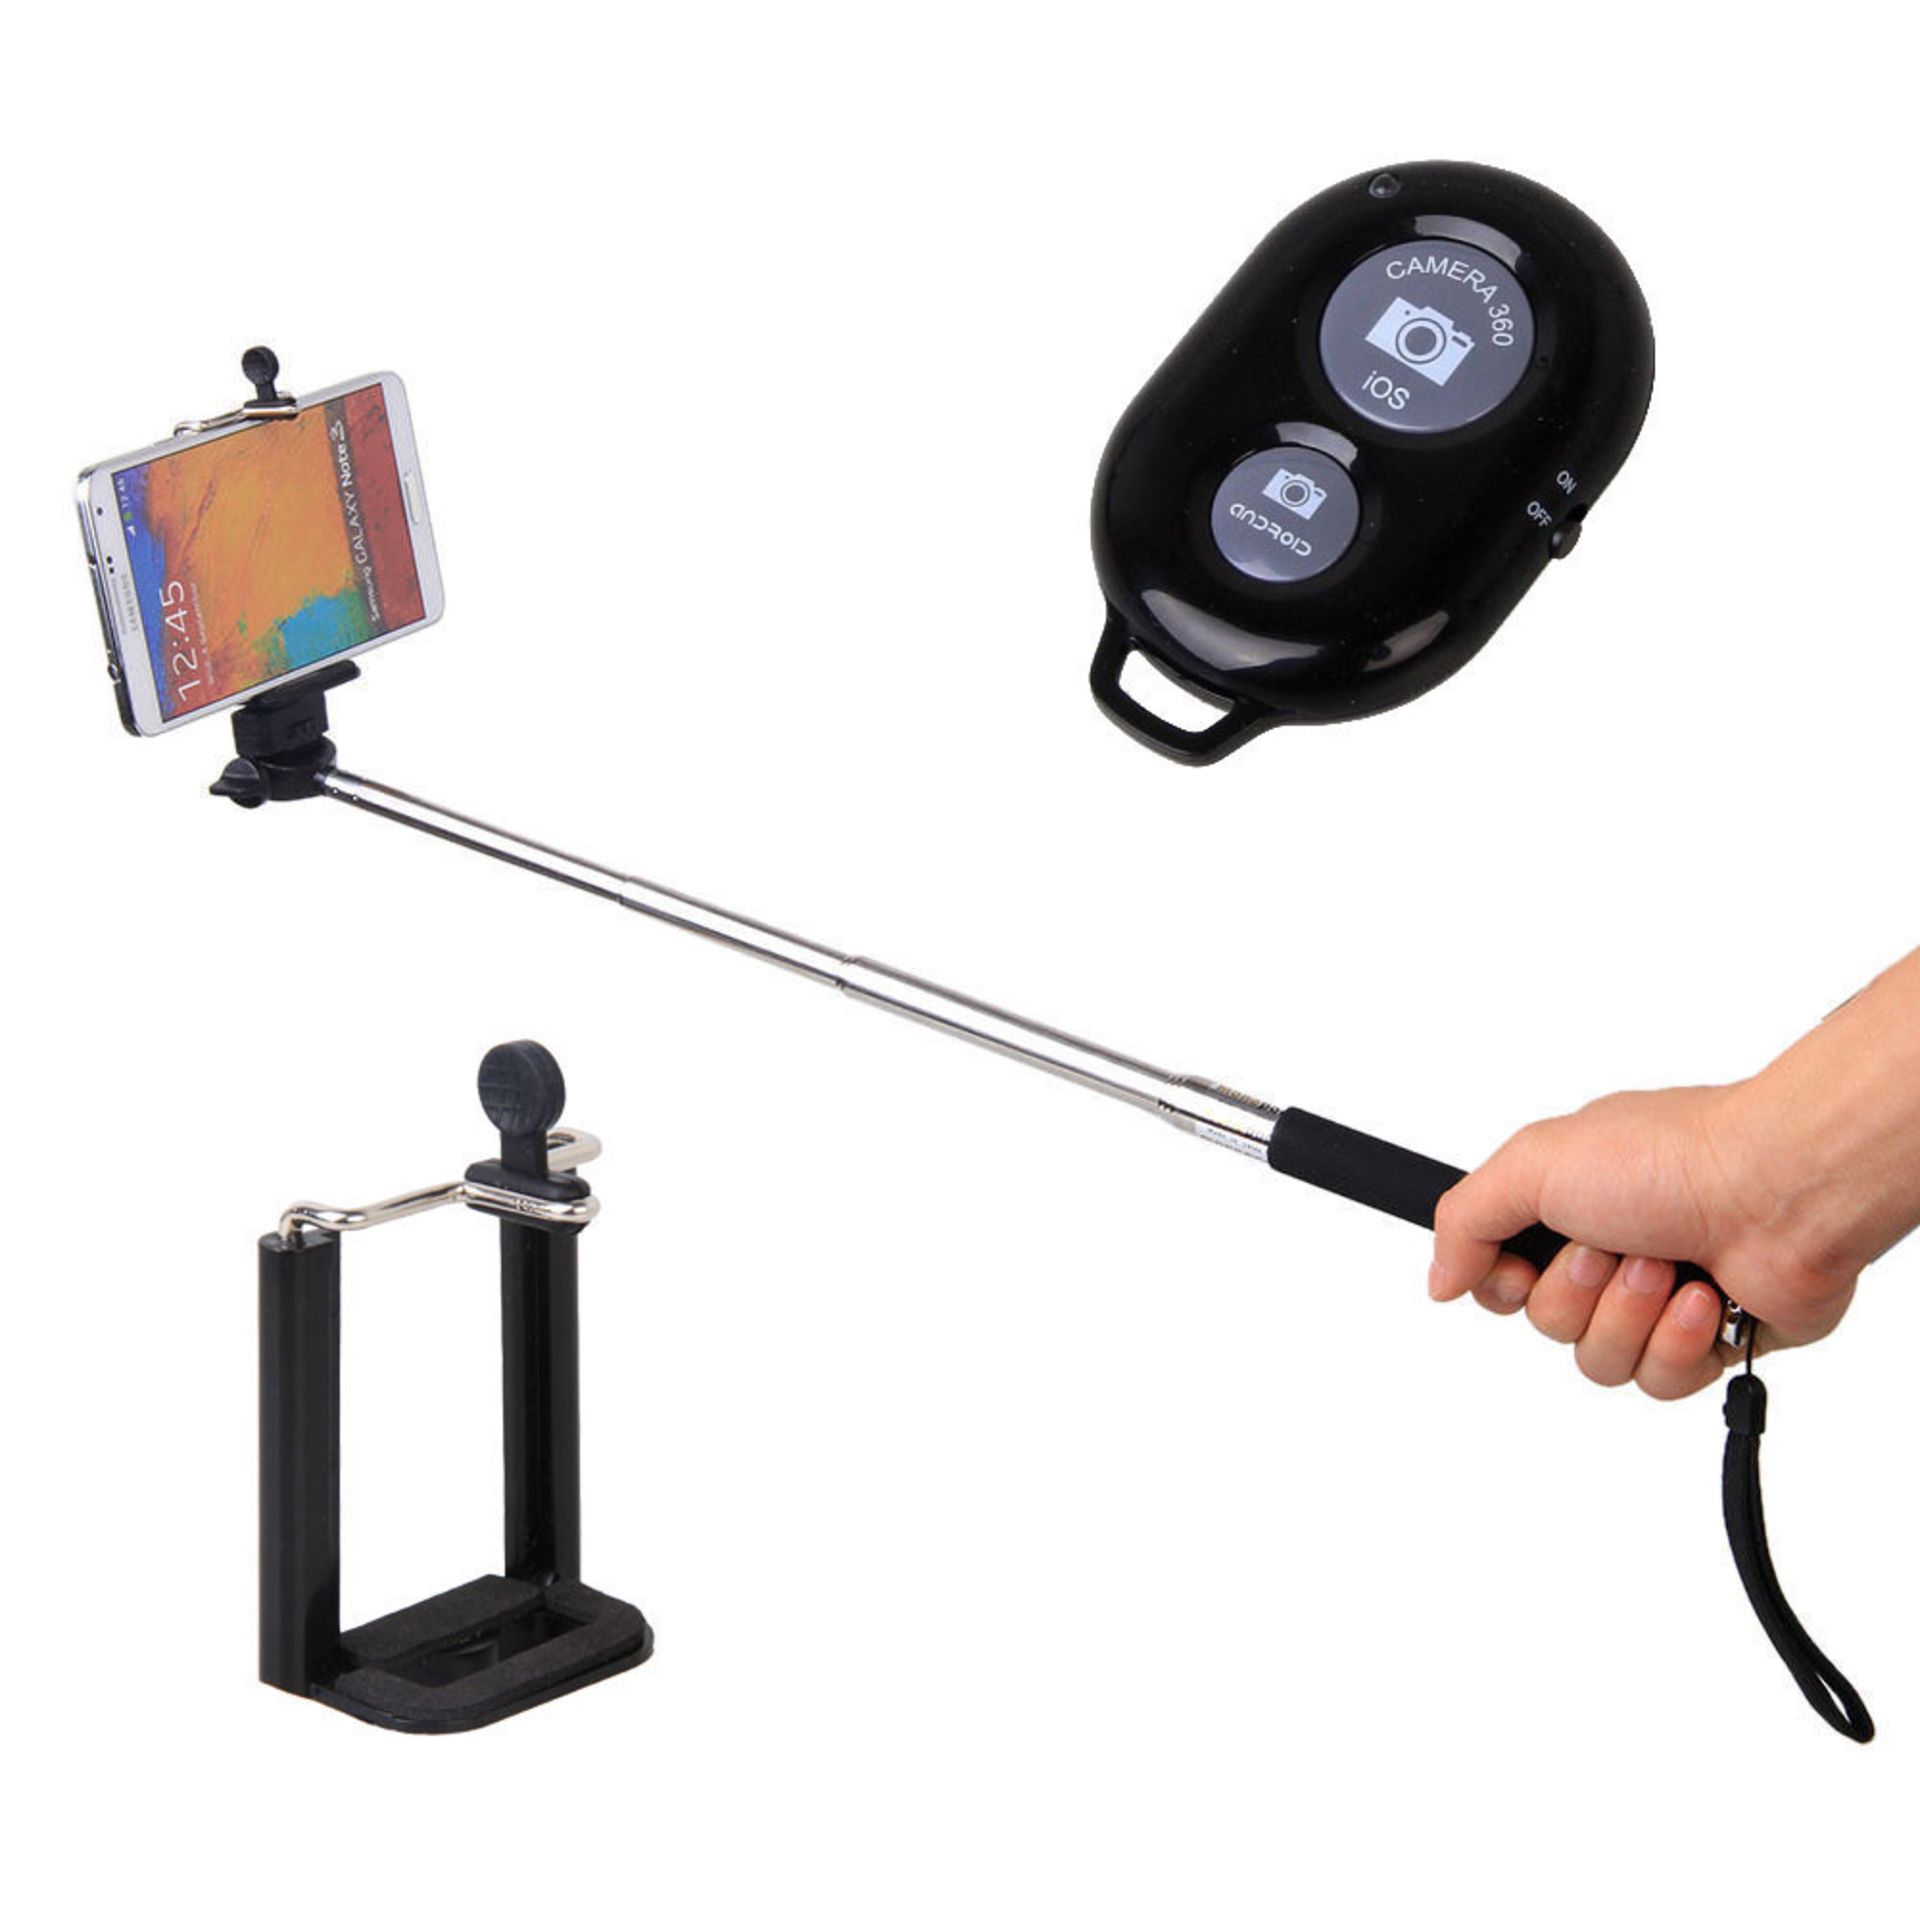 V *TRADE QTY* Brand New Selfie Stick with Bluetooth Remote Control - RRP £19.09 X 20 Bid price to be